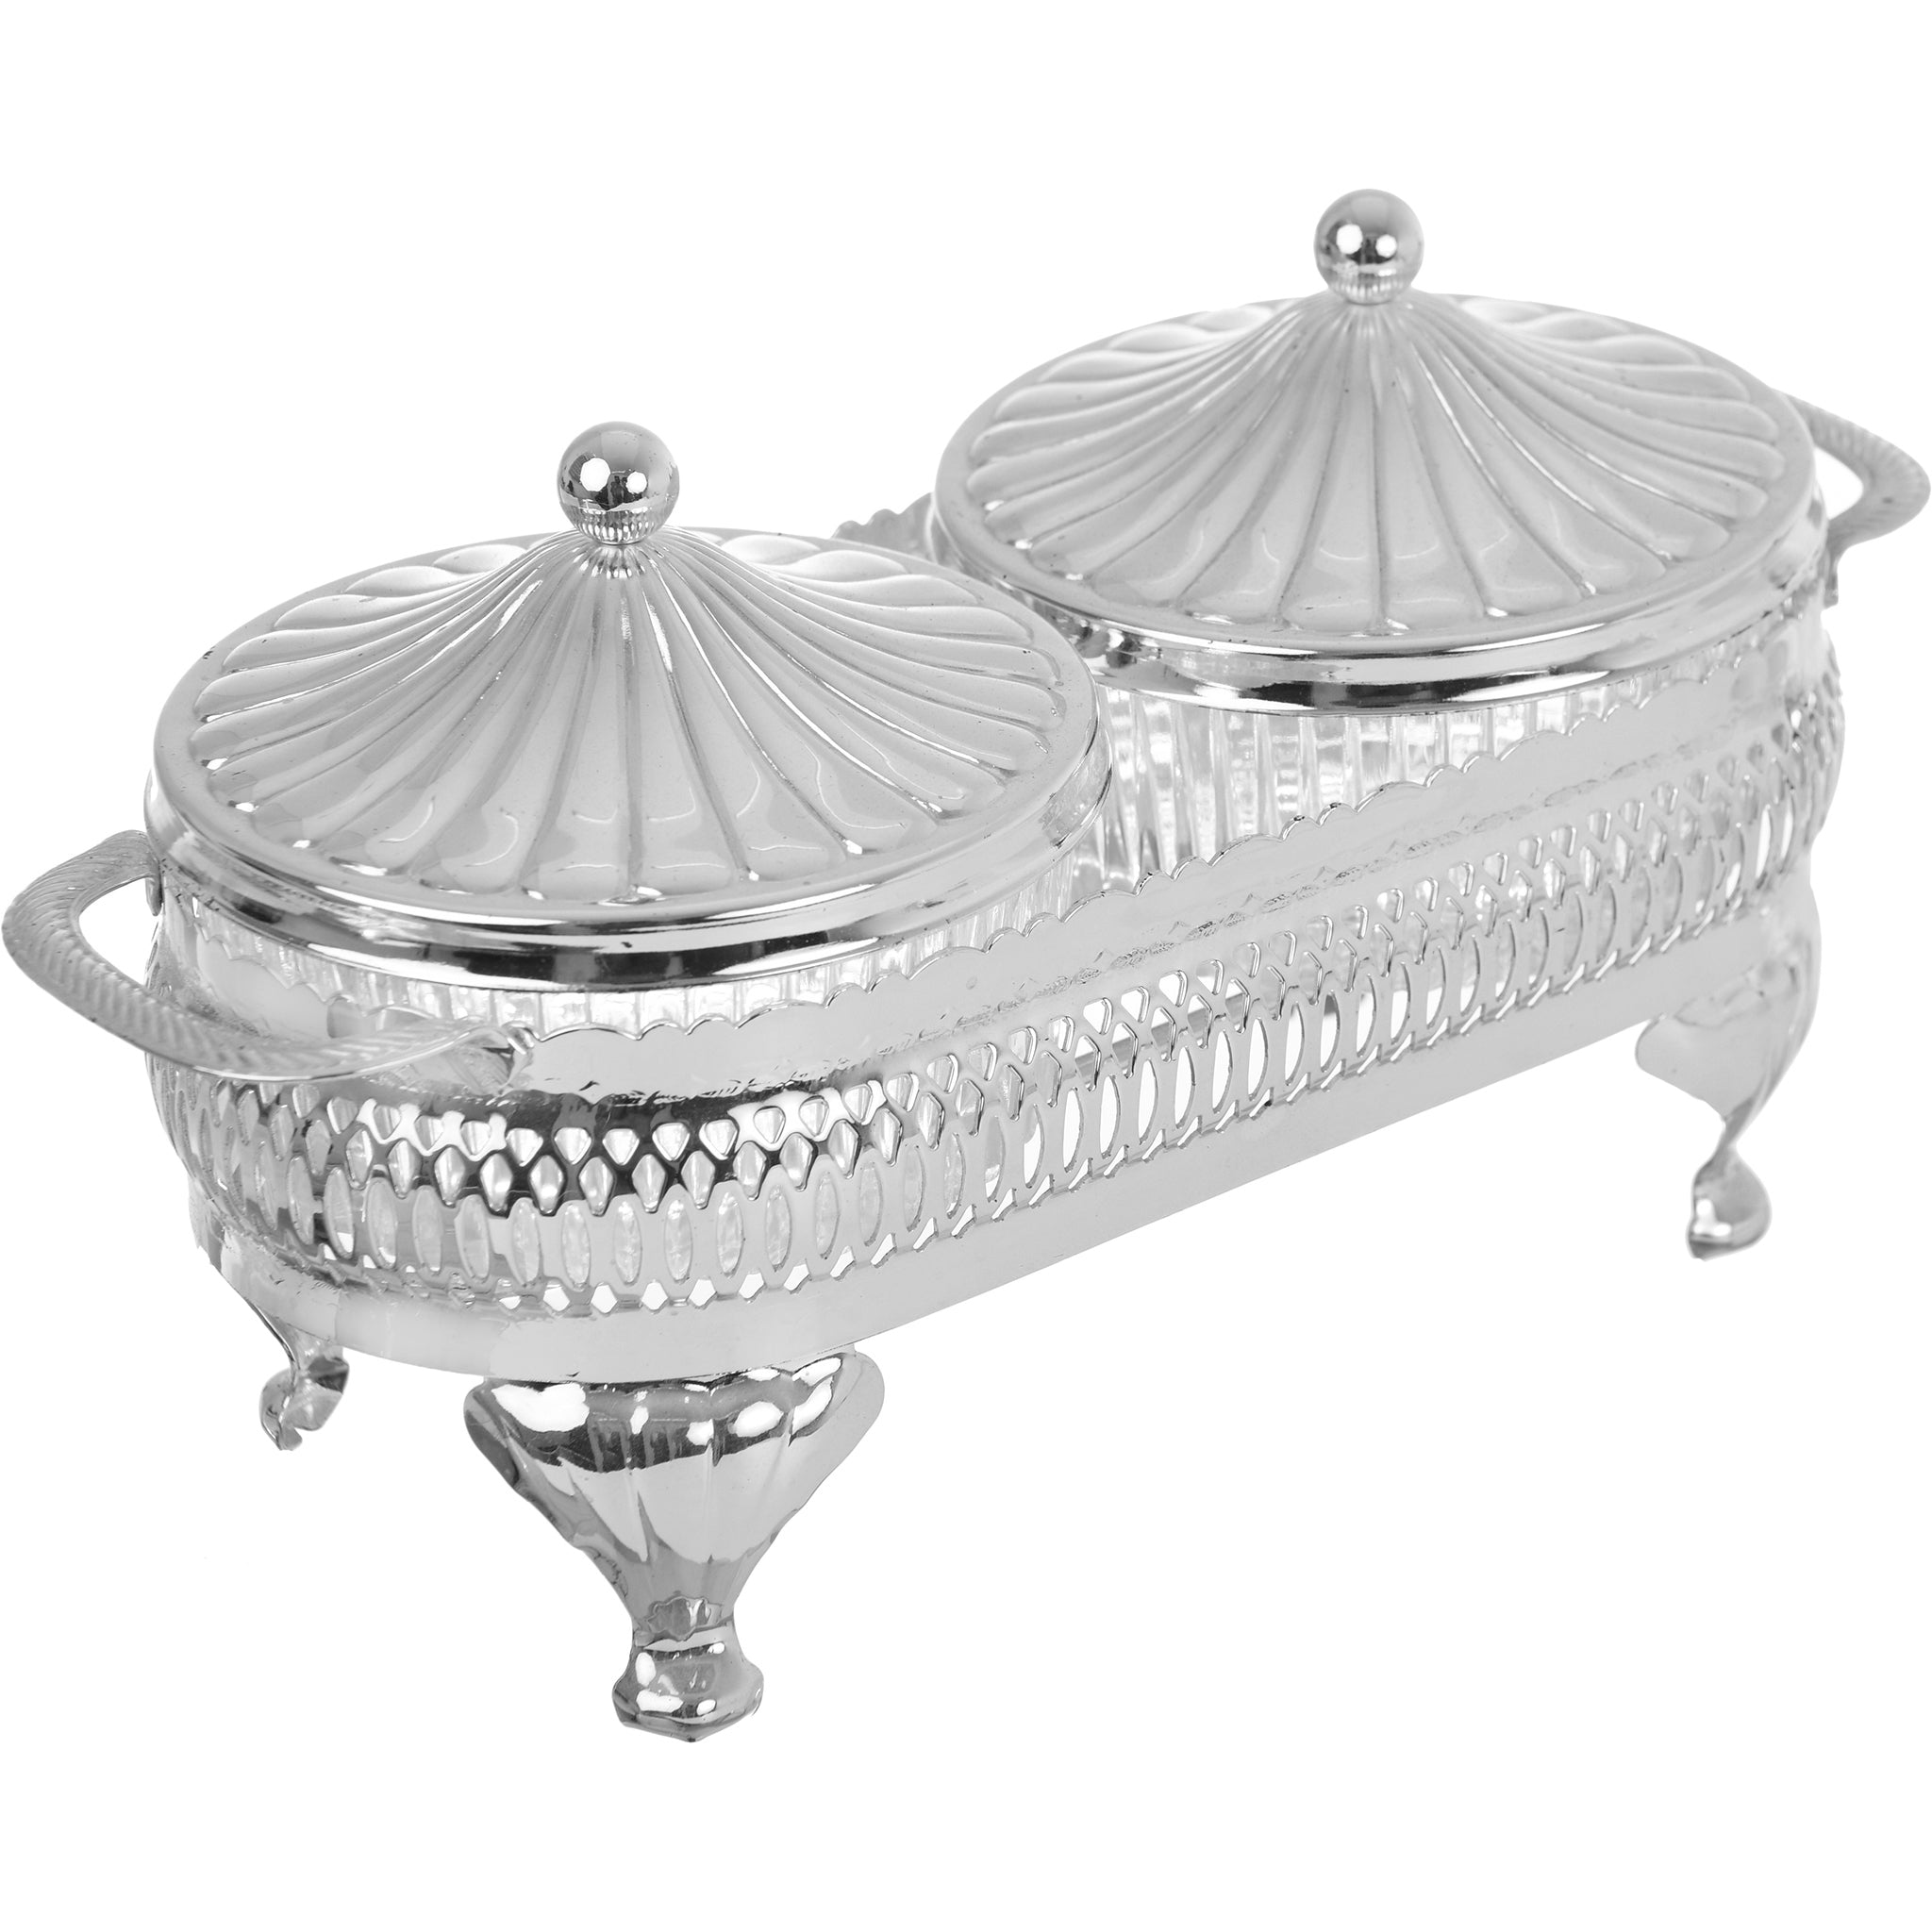 Queen Anne - Round Bowl Set with Silver Plated Stand 2 Pieces - Silver Plated Metal & Glass - 23x11cm - 26000328